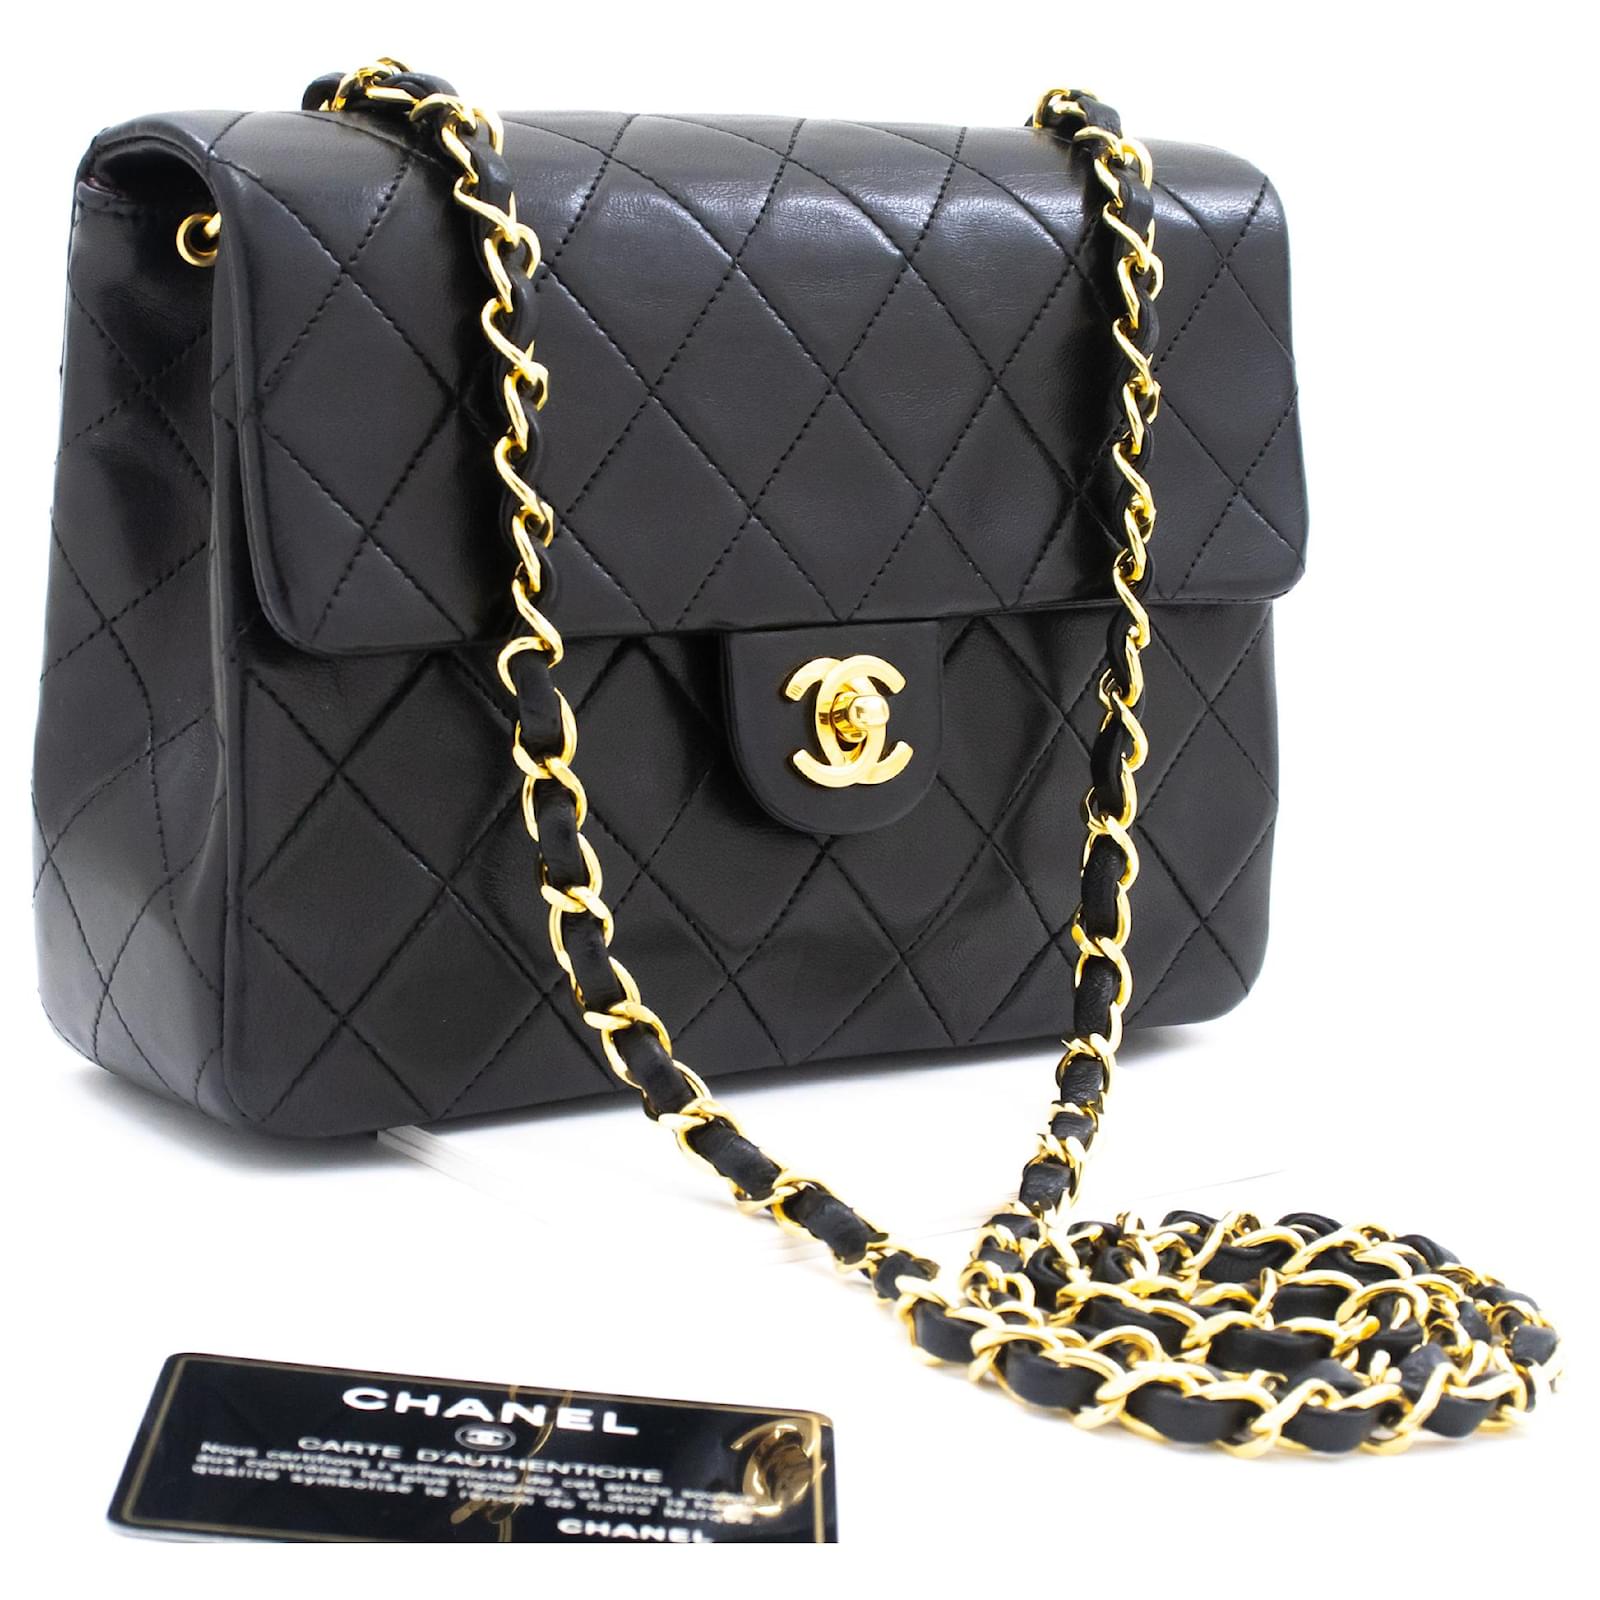 Chanel Black Caviar Leather Quilted Square Mini Crossbody Flap Bag